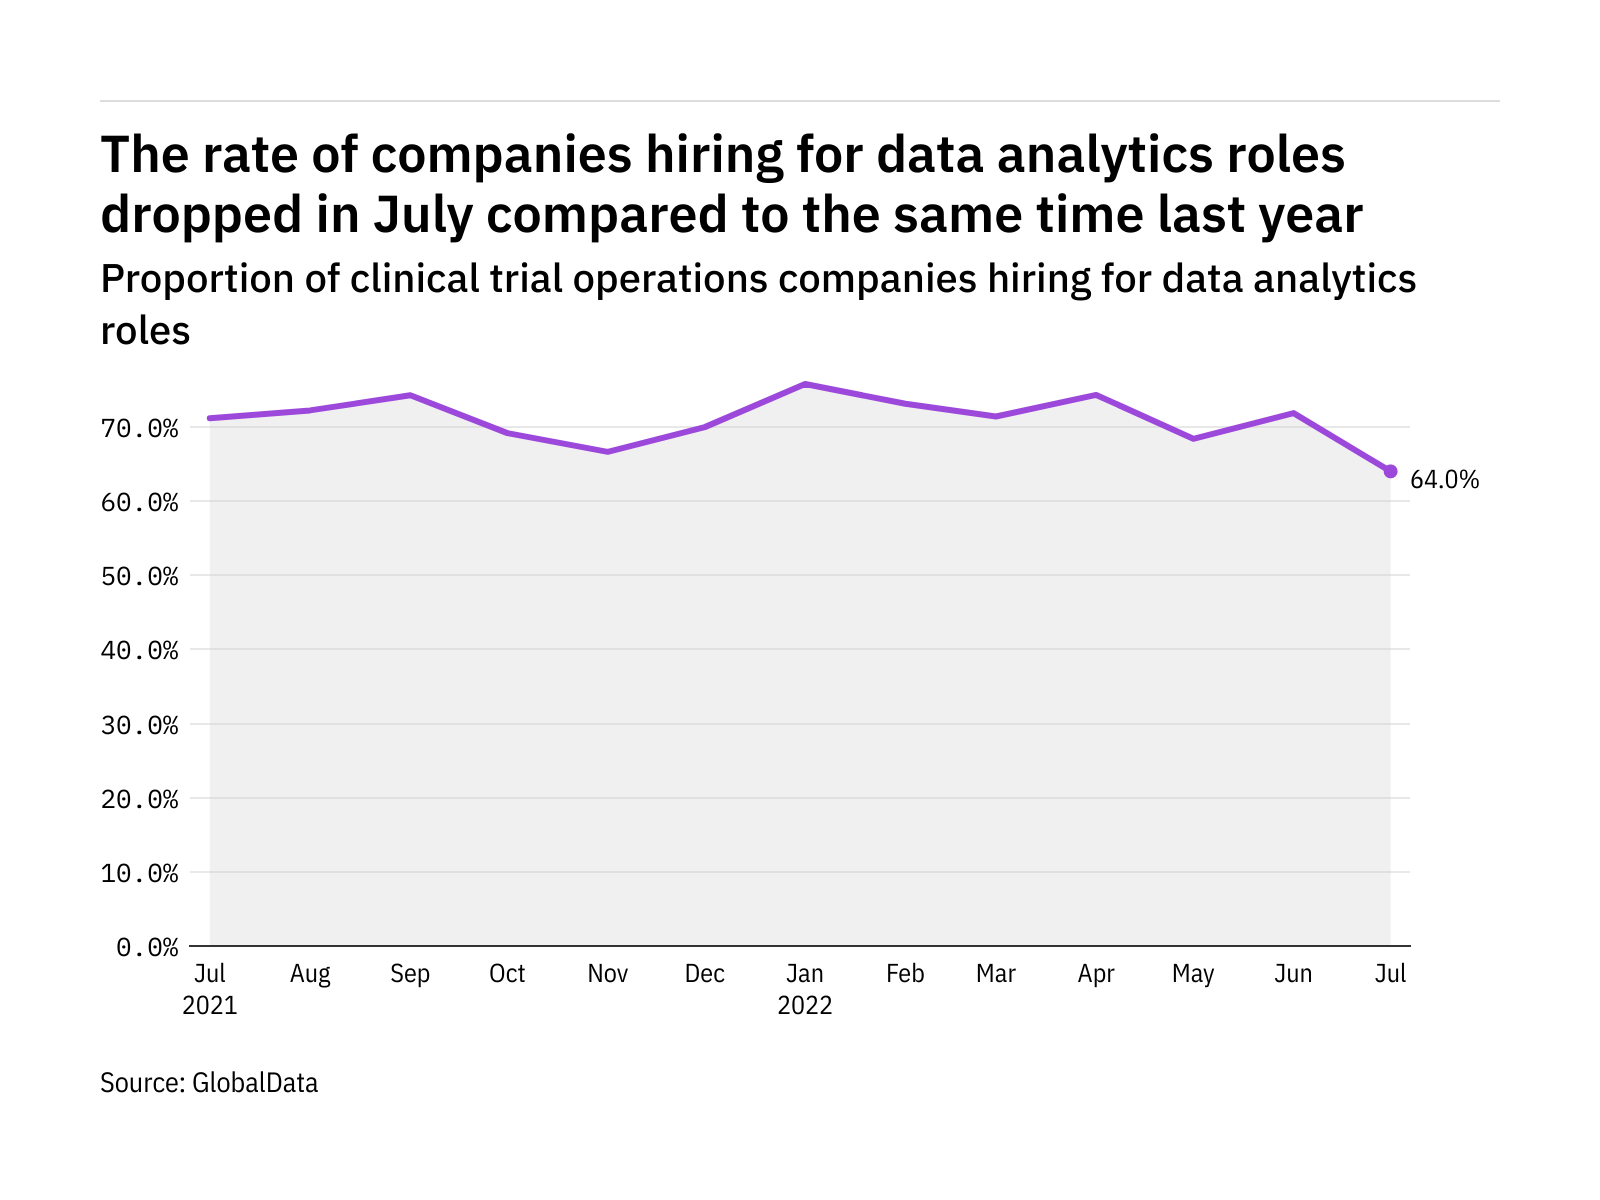 Data analytics hiring in clinical trial operations fell to a year-low in July 2022